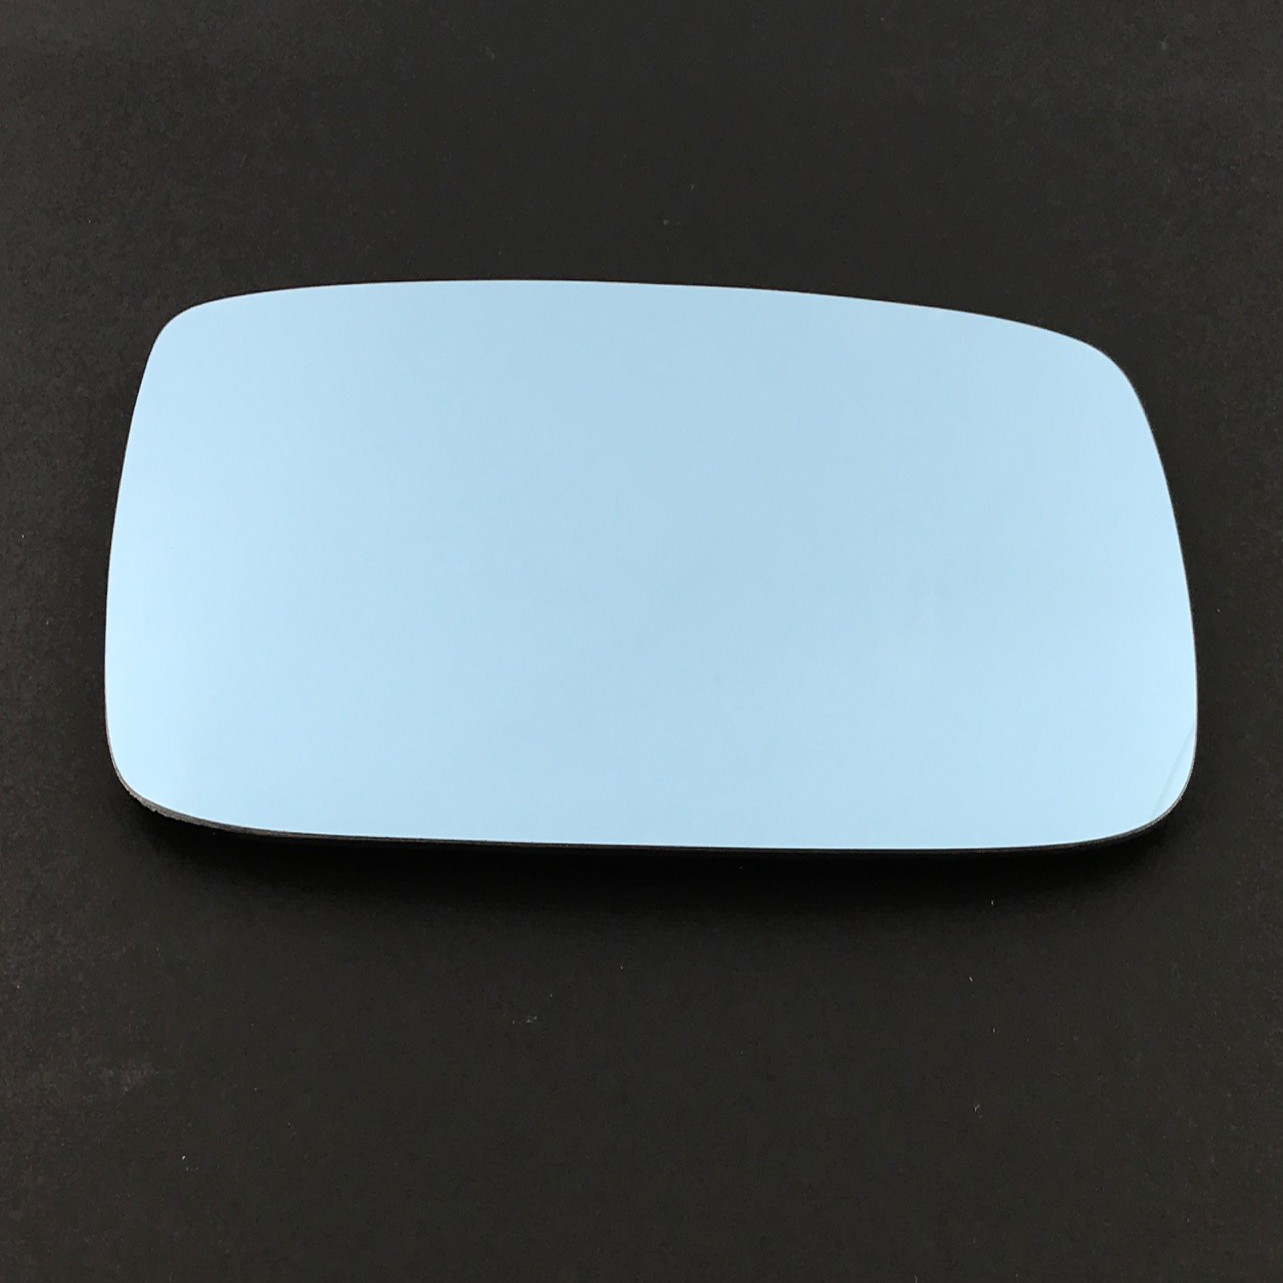 Volvo 960 Wing Mirror Glass LEFT HAND ( UK Passenger Side ) 1990 to 1997 – Convex Wing Mirror ( Blue Tinted )